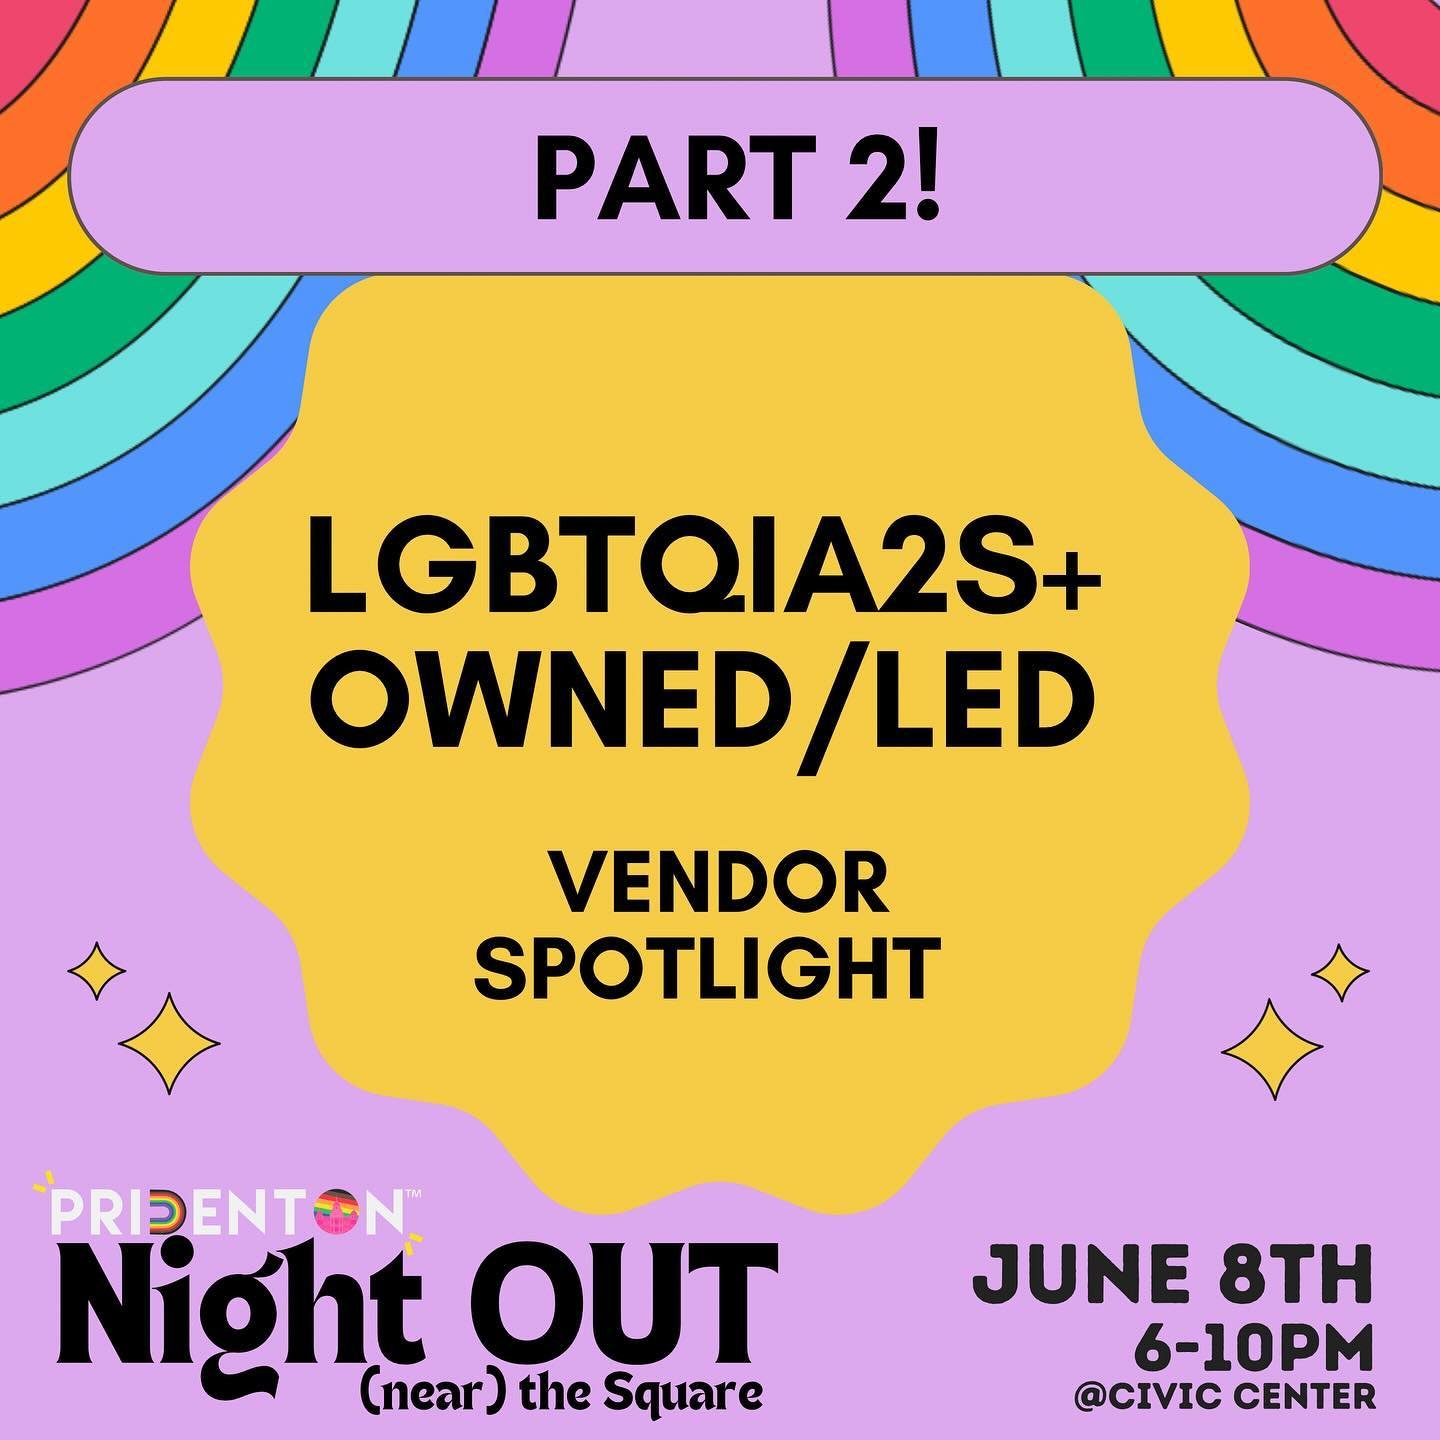 We got more QTs! PART 2 of our Vendor Highlight series.

Night OUT is less than one month away! This year, we have over 50 LGBTQIA2S+ owned and/or led businesses and organizations. We&rsquo;ll be highlighting them in the upcoming weeks.

We have some